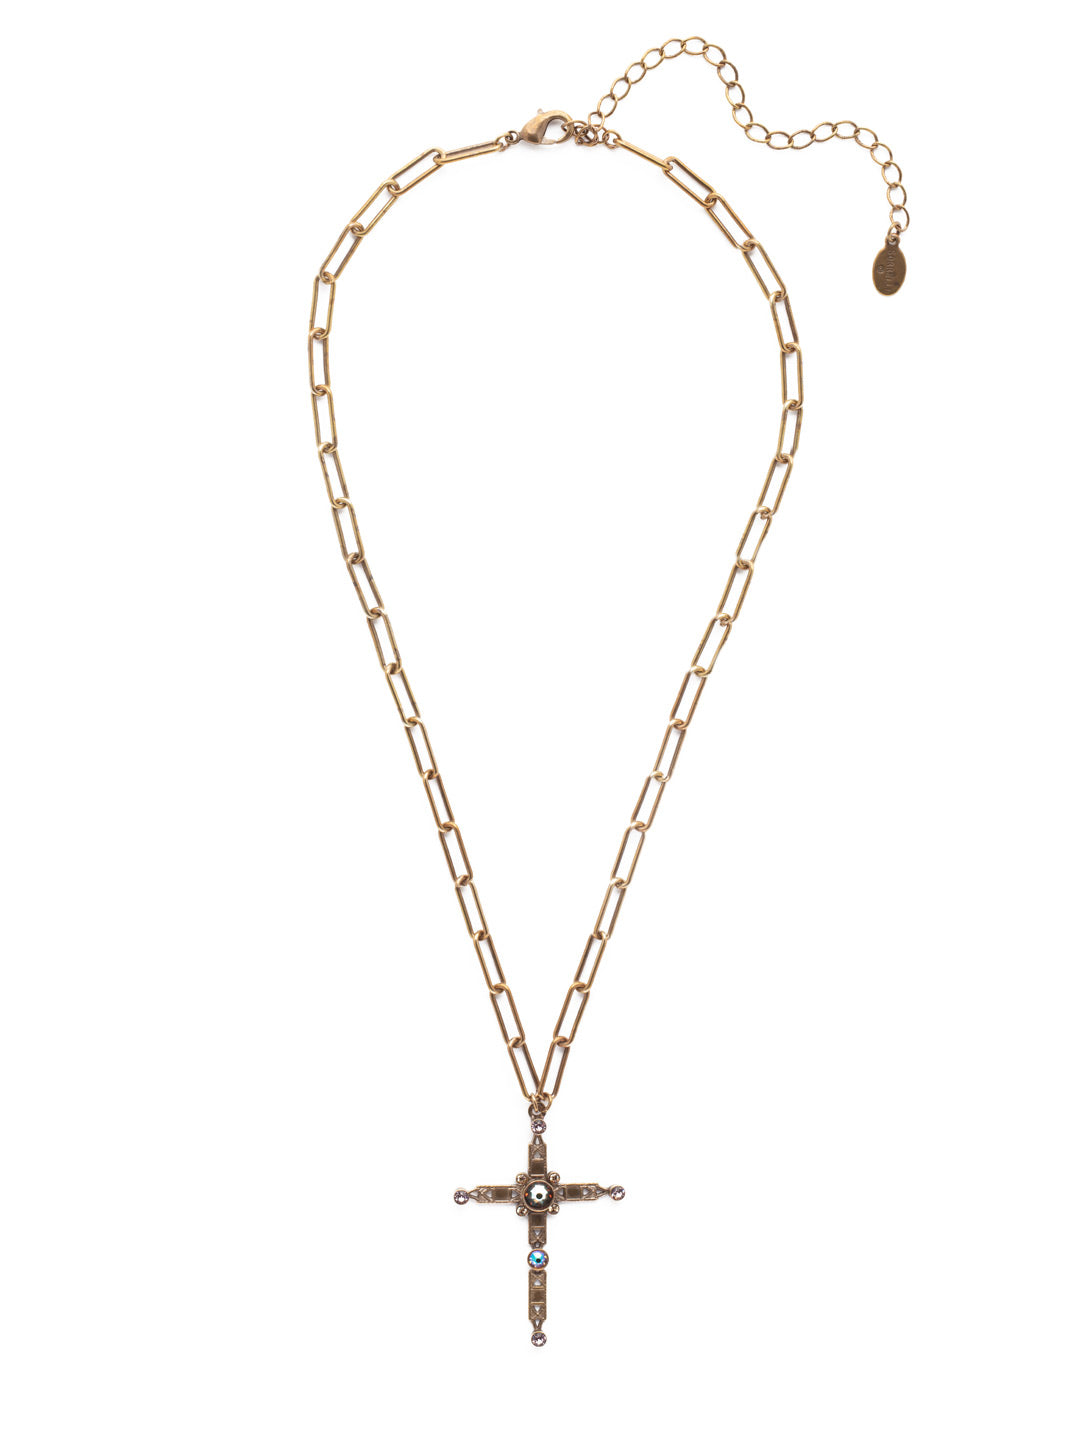 Norah Cross Pendant Necklace - NEX11AGMIR - <p>The Norah Cross Pendant Necklace hosts a modern style cross pendant, overlaid with various crystals and hanging from an adjustable, trendy paperclip chain. From Sorrelli's Mirage collection in our Antique Gold-tone finish.</p>